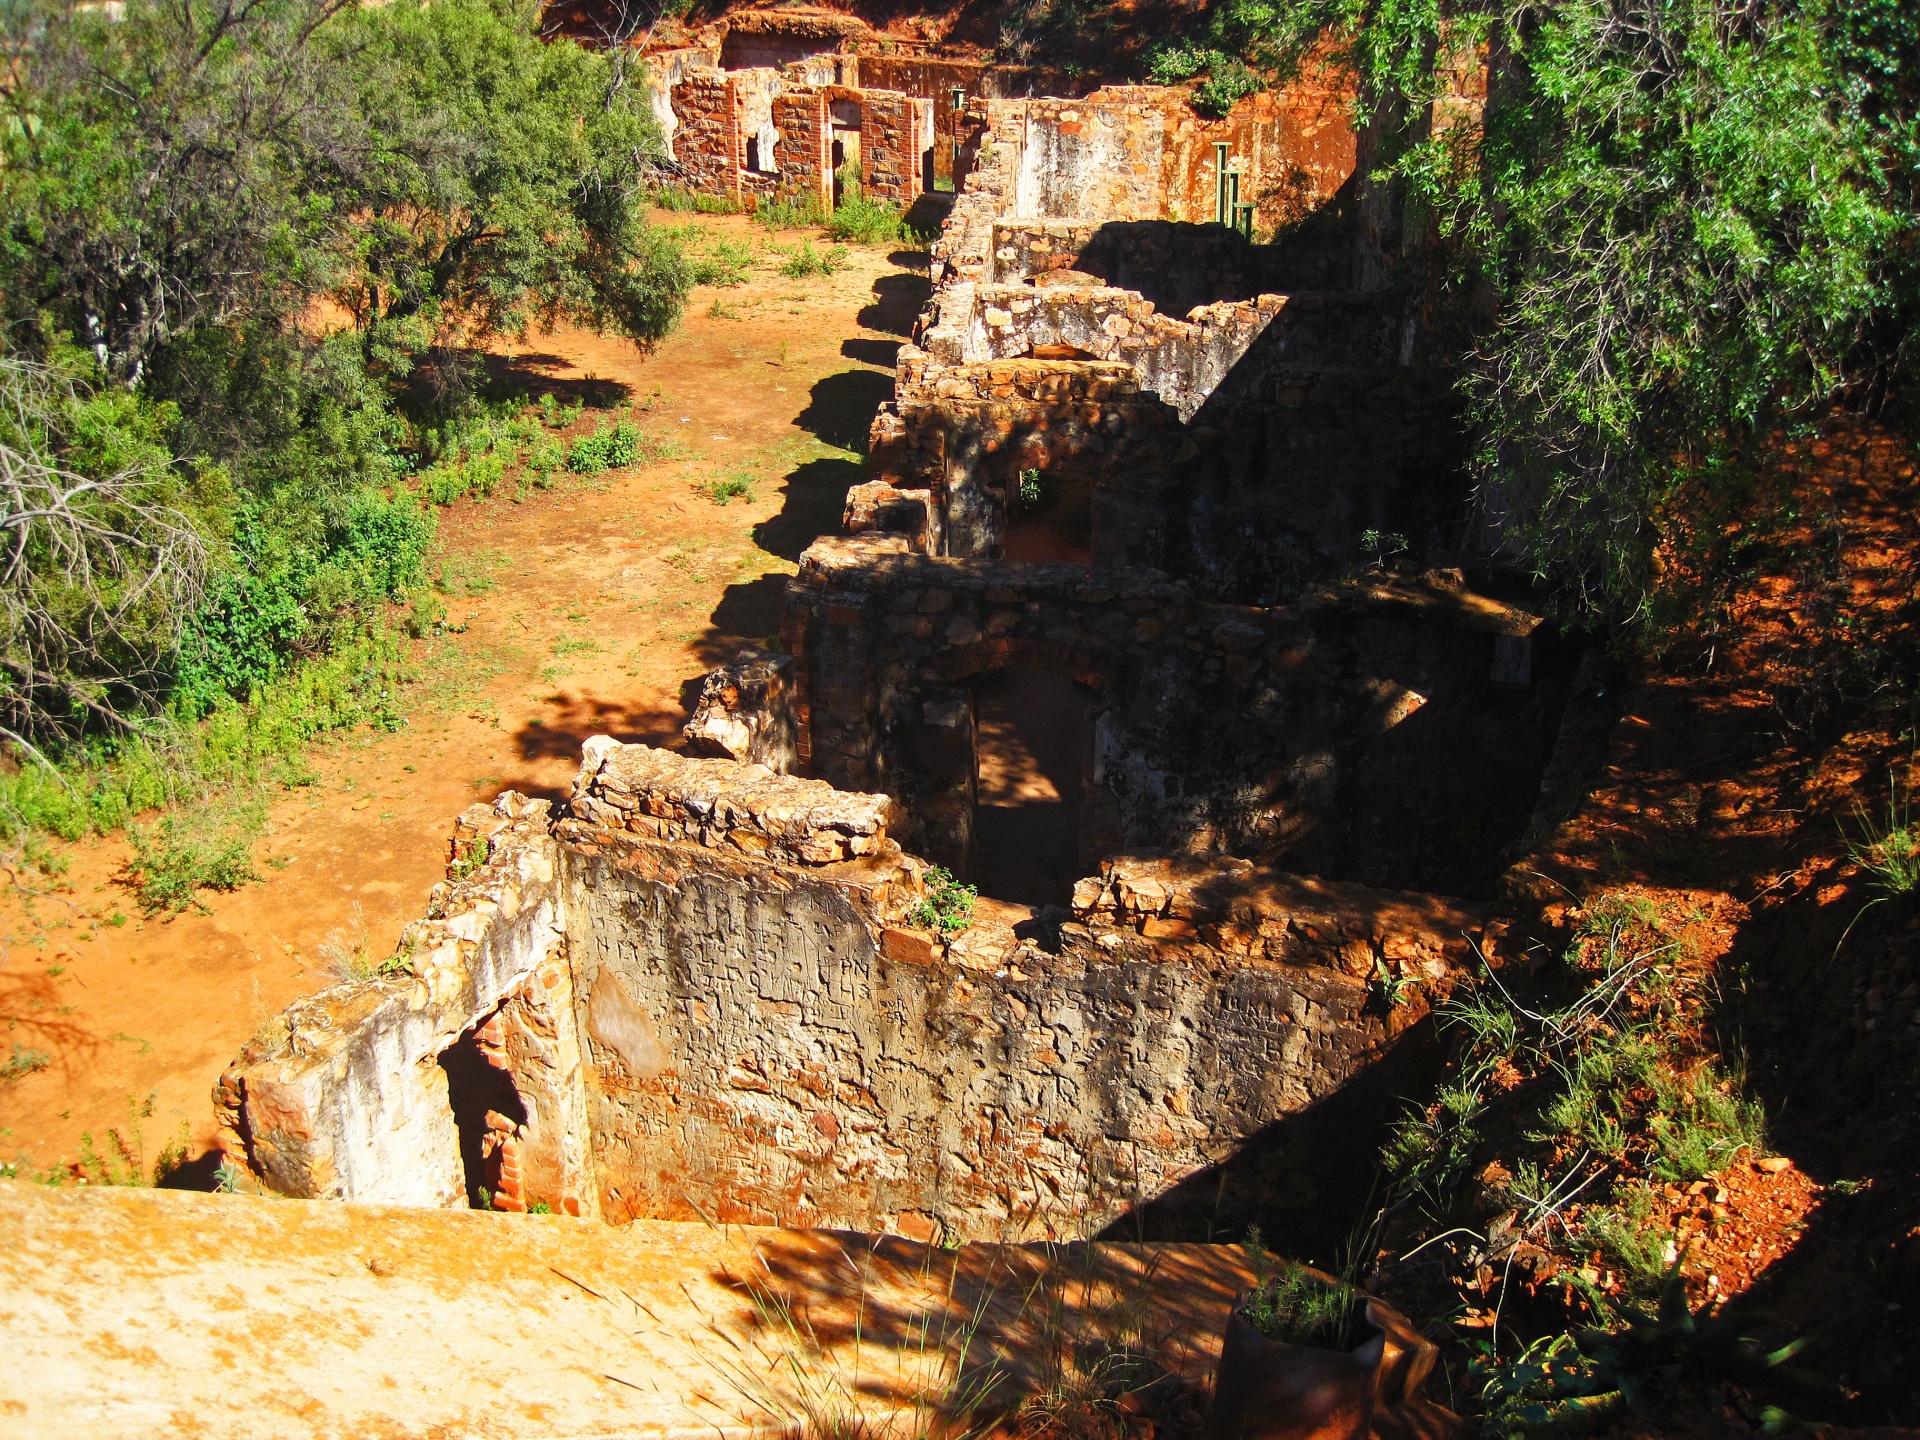 aerial view of inner structure of fort in ruin with green trees